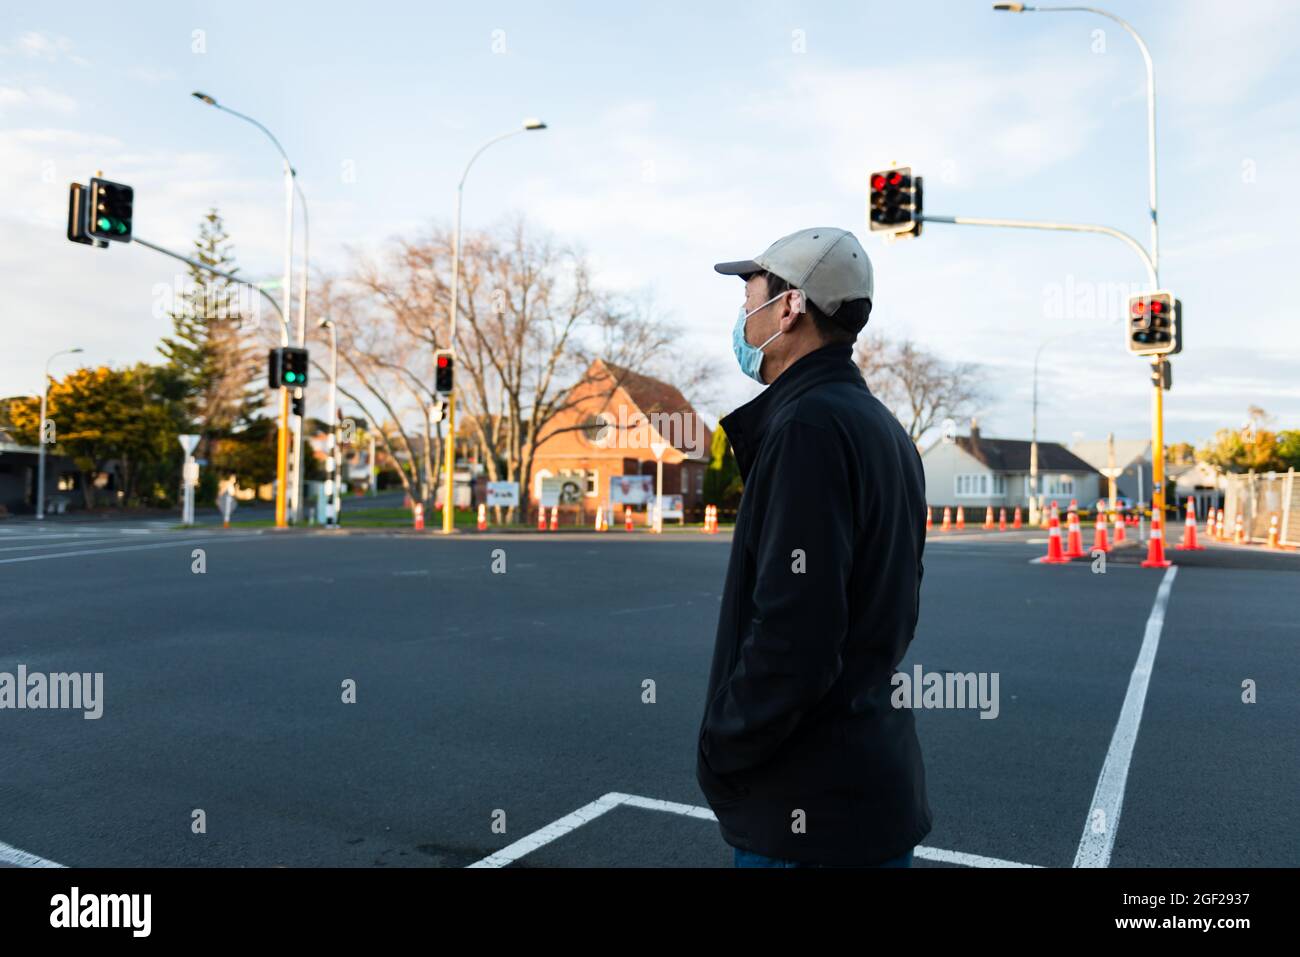 Man wearing a facemask waiting at the intersection for the green pedestrian light. Roadwork traffic cones along the street. Stock Photo